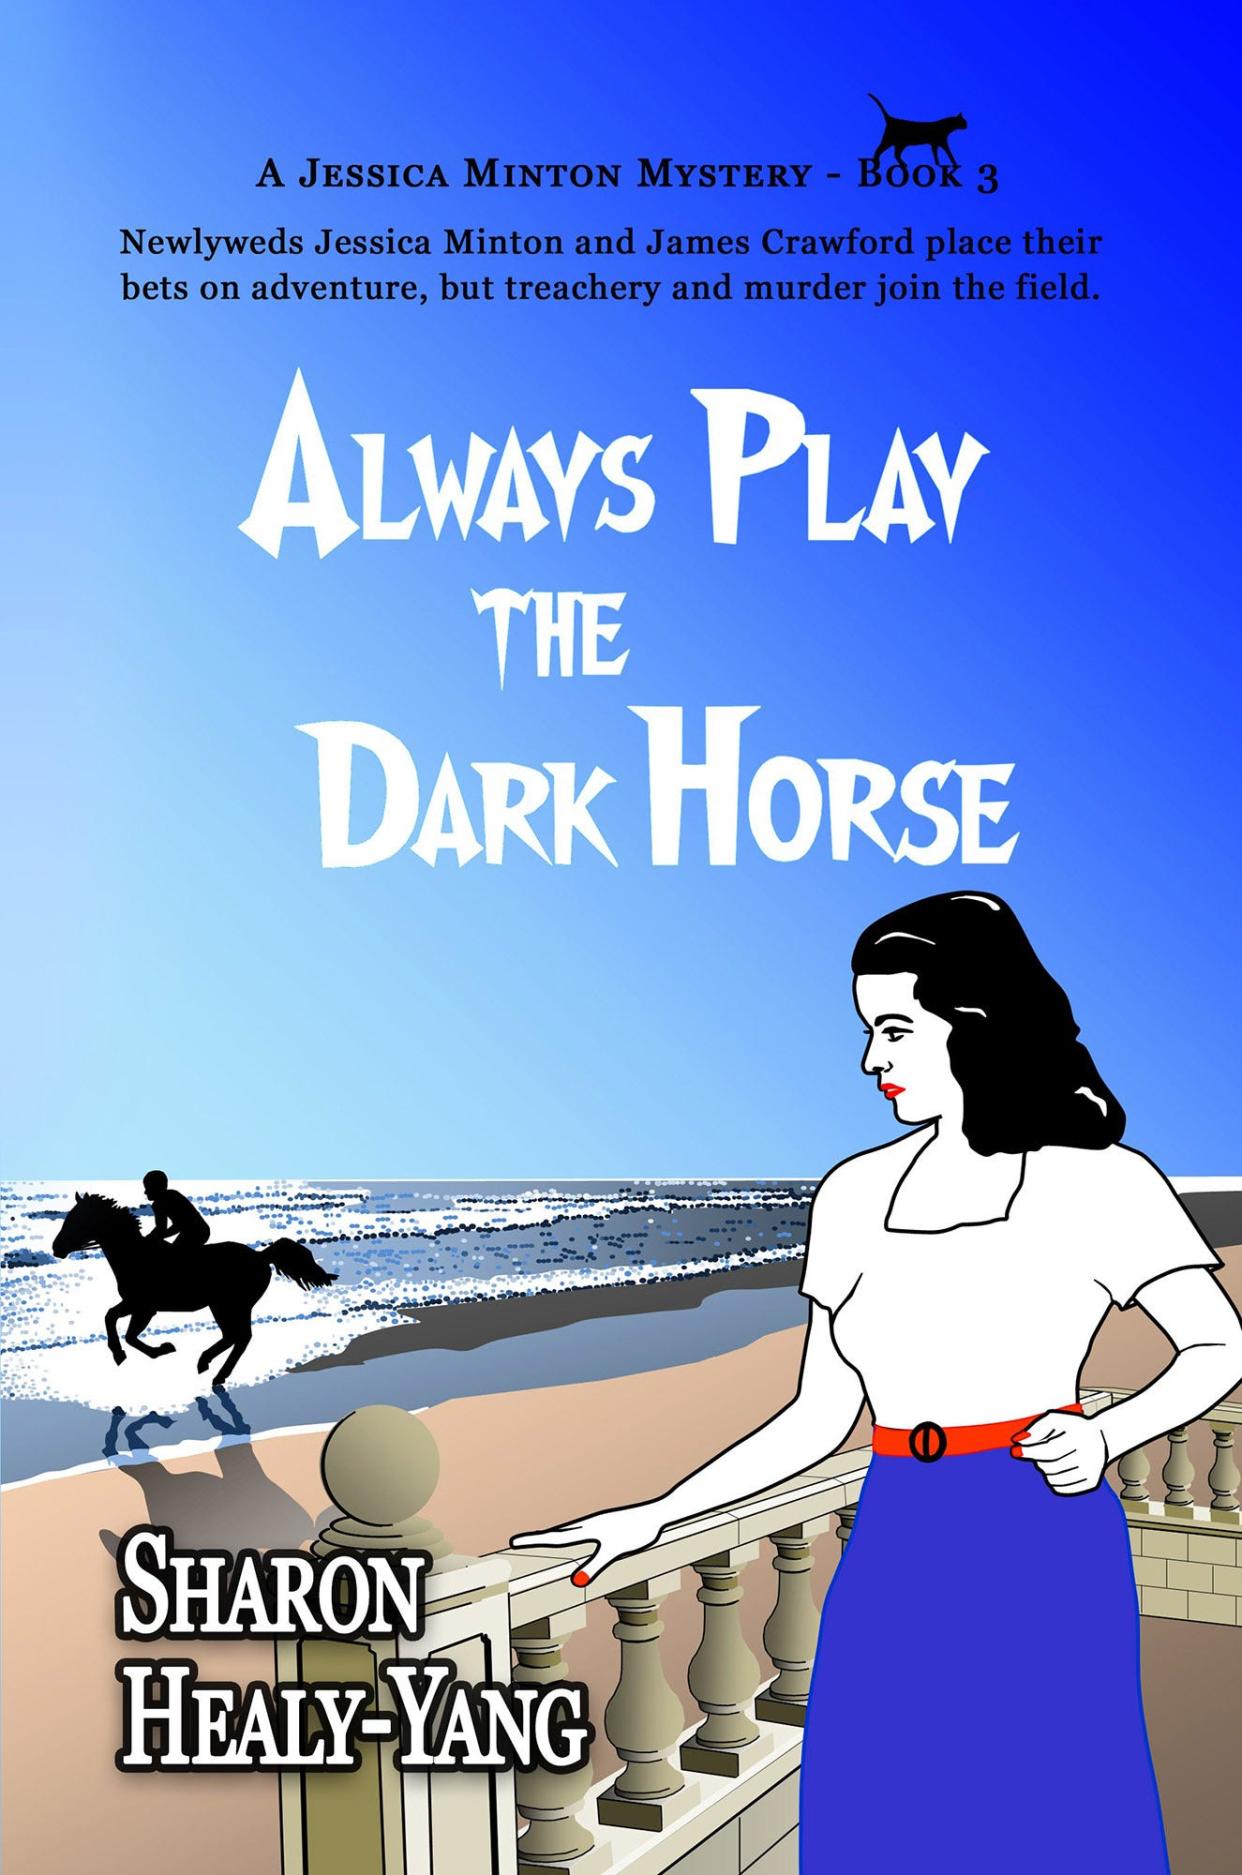 Author Sharon Healy-Yang will sign copies of her book "Always Play the Dark Horse" May 8 at TidePool Book Shop.